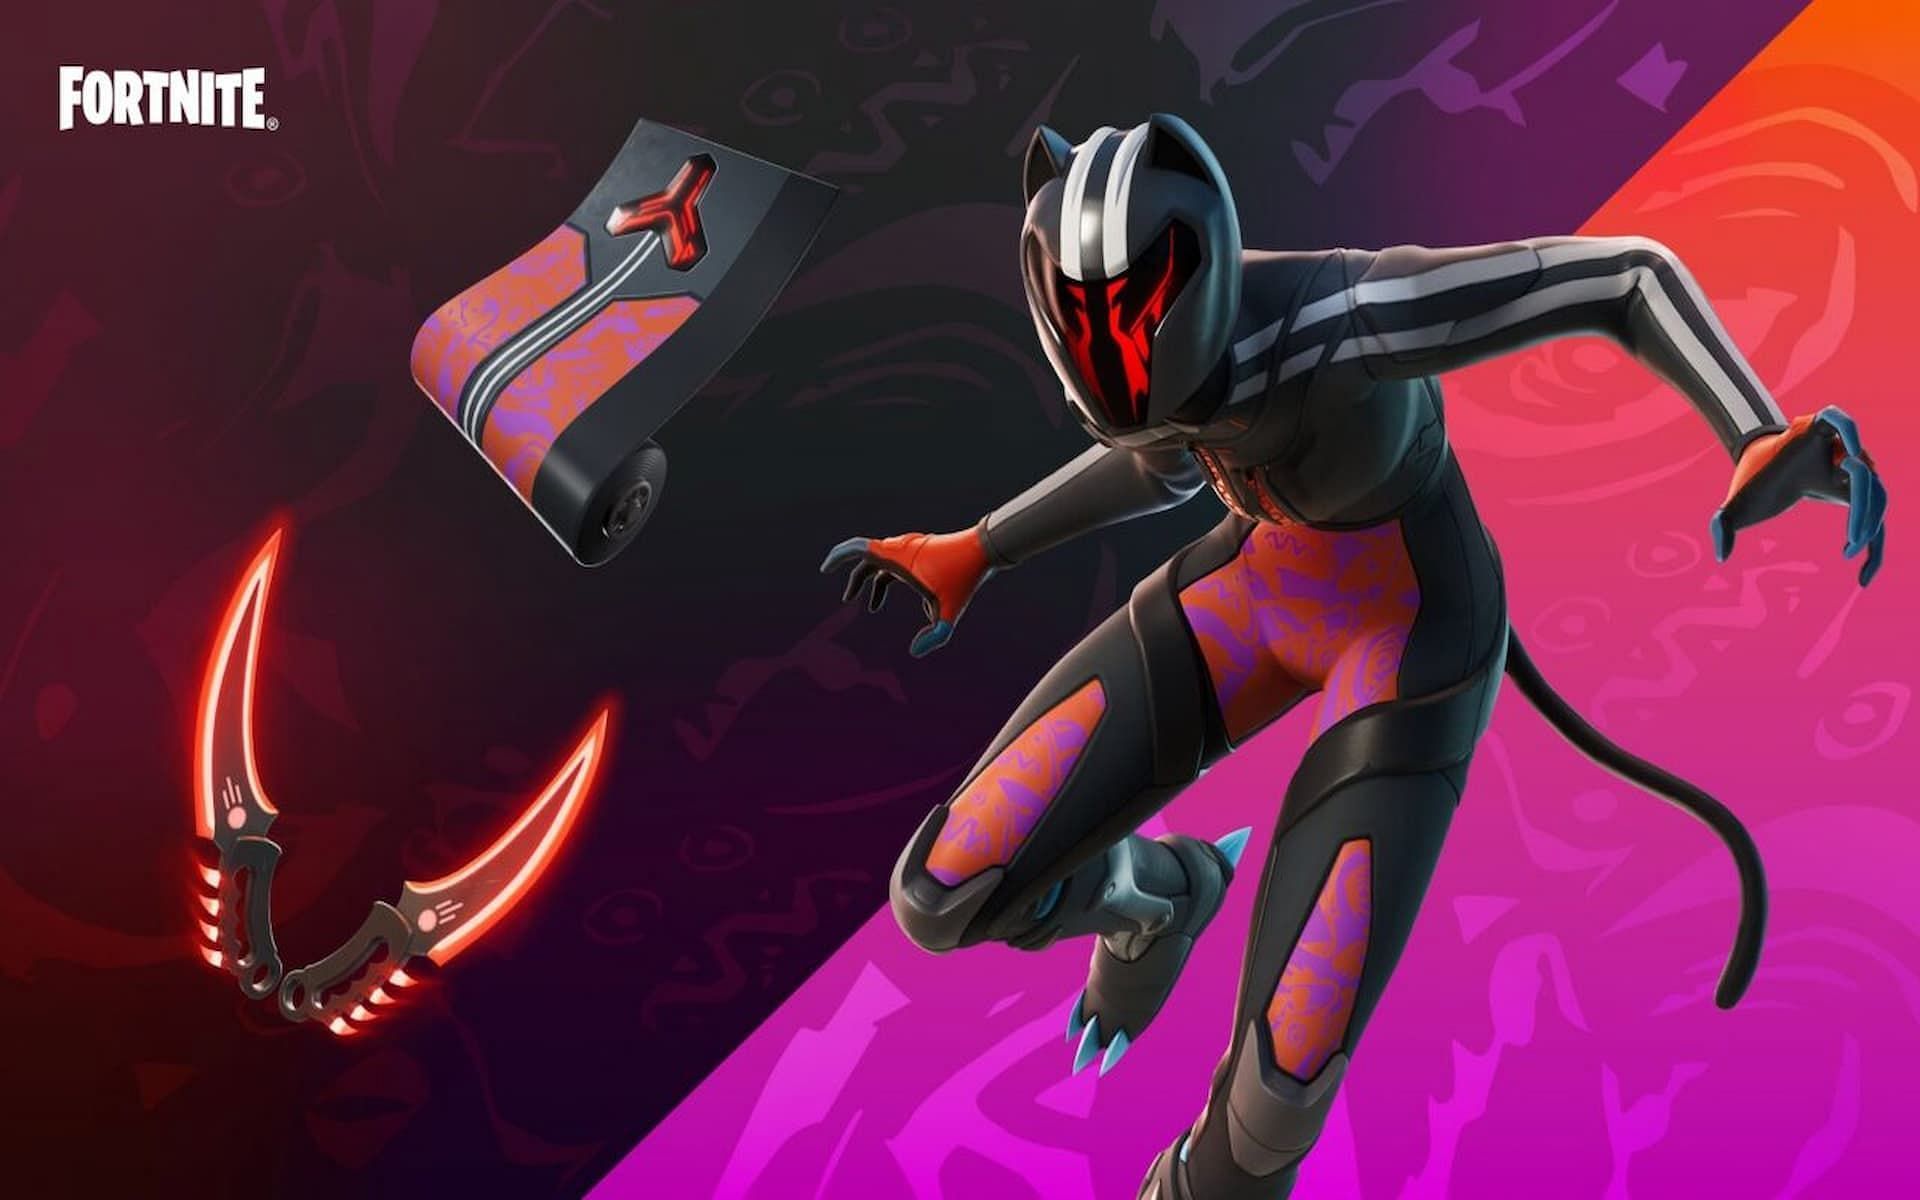 A look at the Operation Black Tabby Bundle in Fortnite (Image via Epic Games)